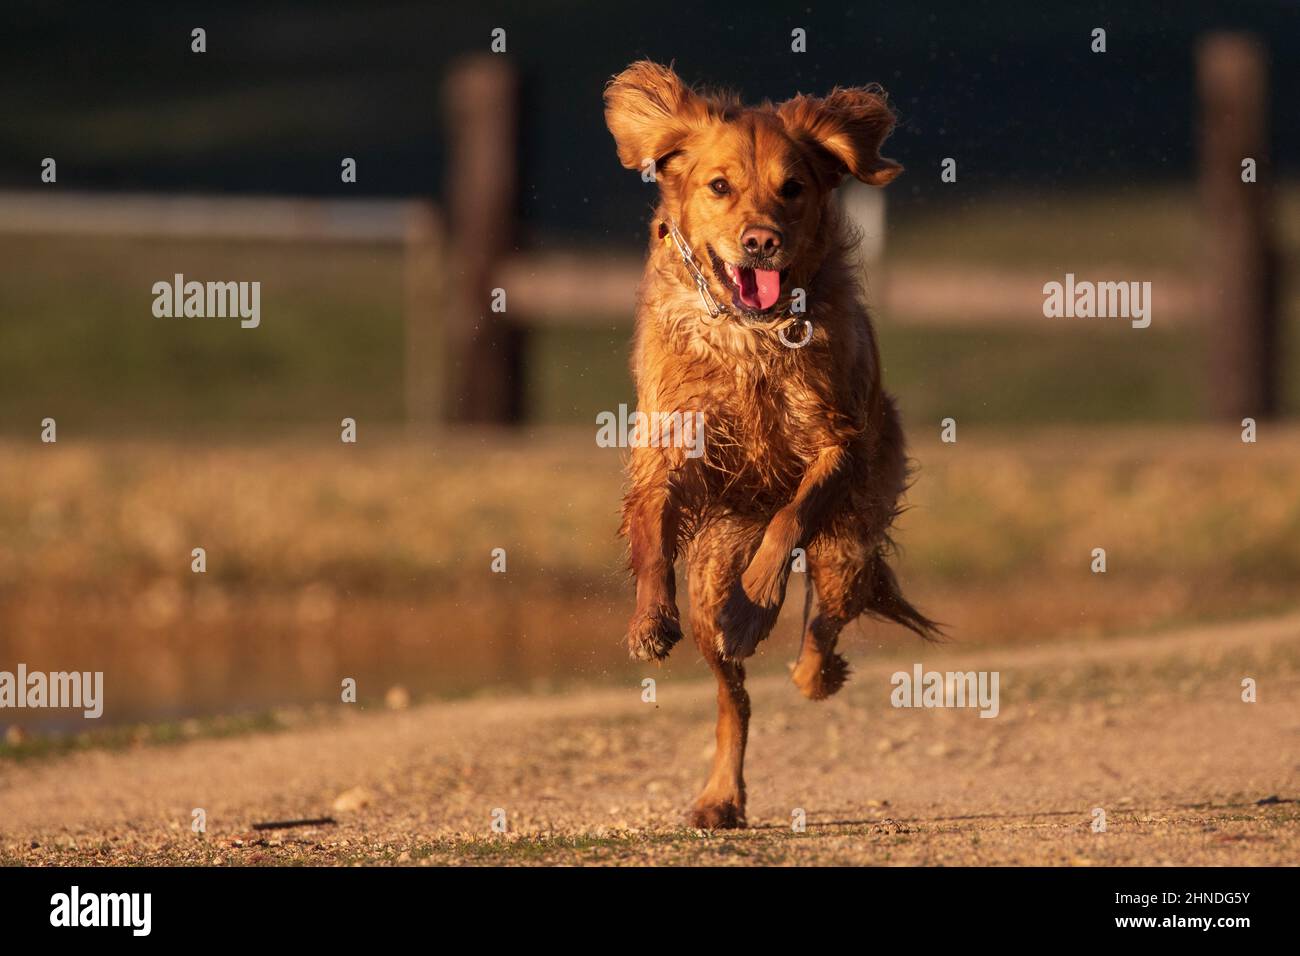 Golden Retriever running toward camera on shore of pond with whimsical, funny look on its face and tongue out. Stock Photo